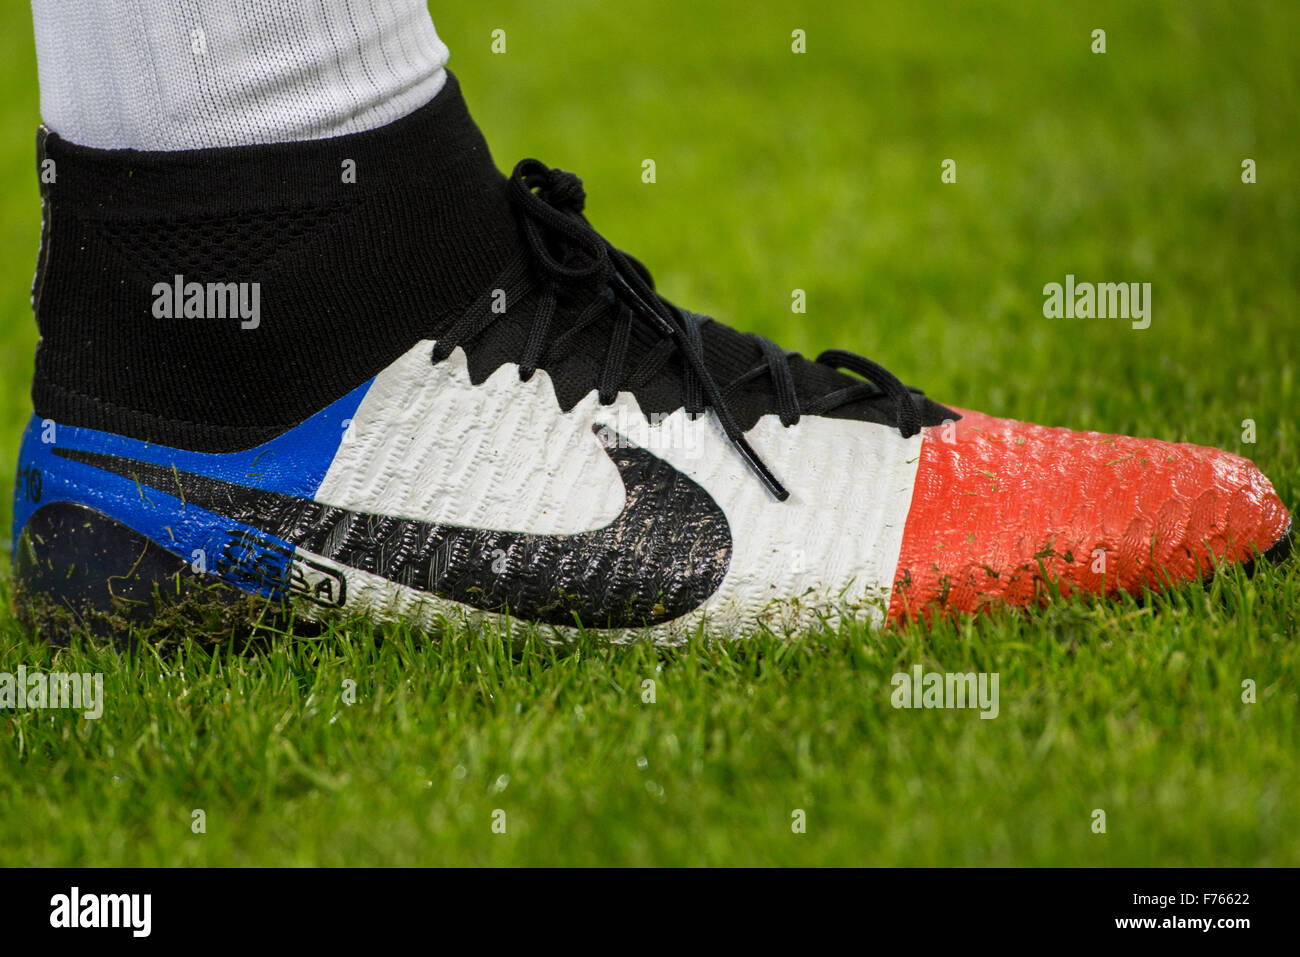 Turin, Italy. 25th Nov, 2015. Paul Pogba' shoe (Juventus) Football/Soccer :  The detail shot. UEFA Champions League Group D match between Juventus 1-0  Manchester City at Juventus Stadium in Turin, Italy . ©